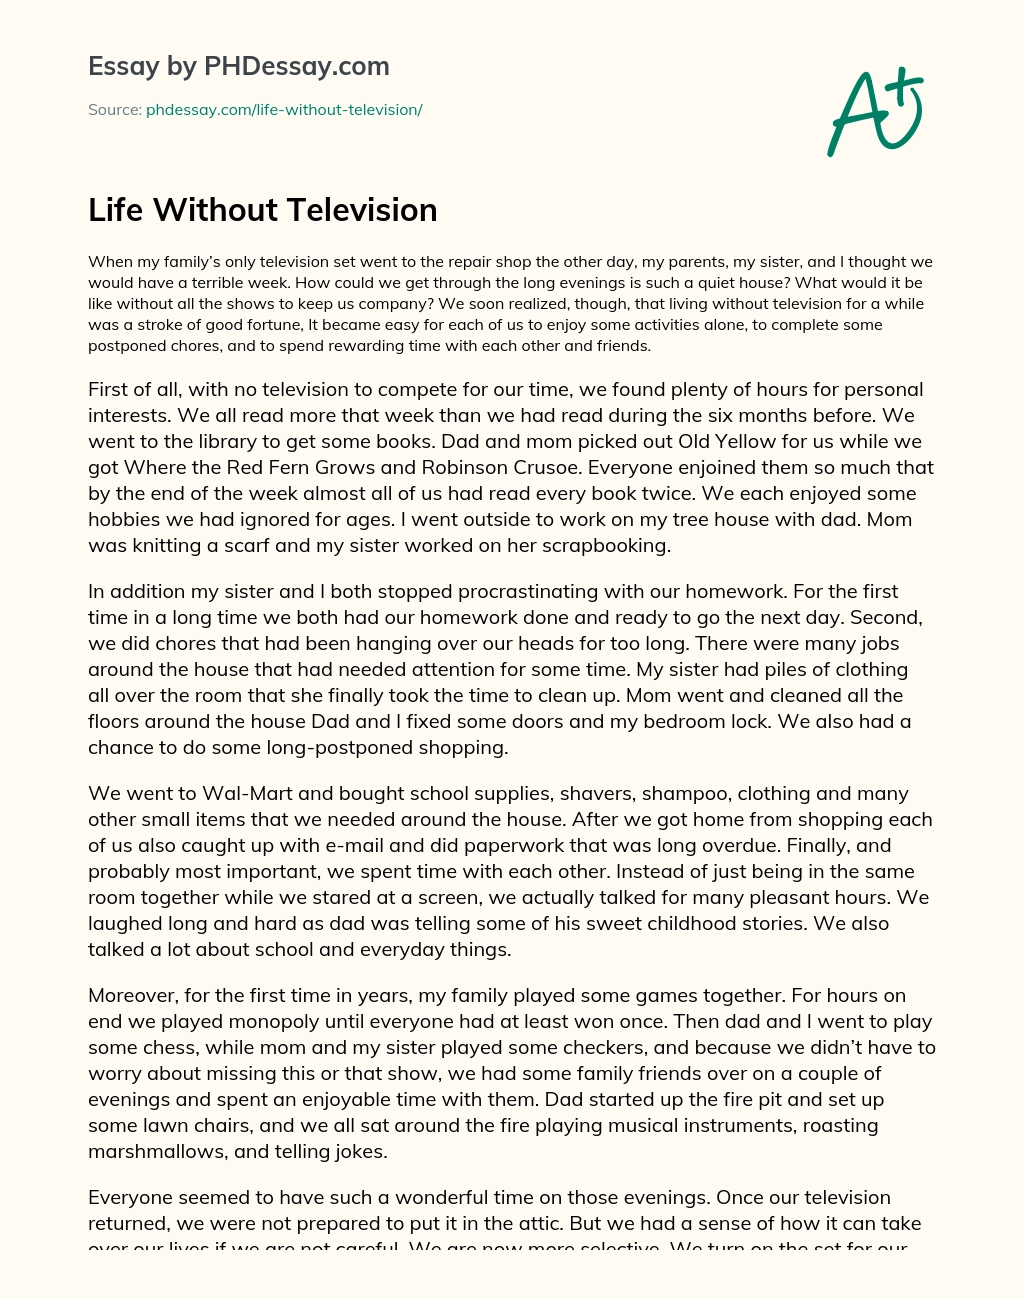 essay life without television